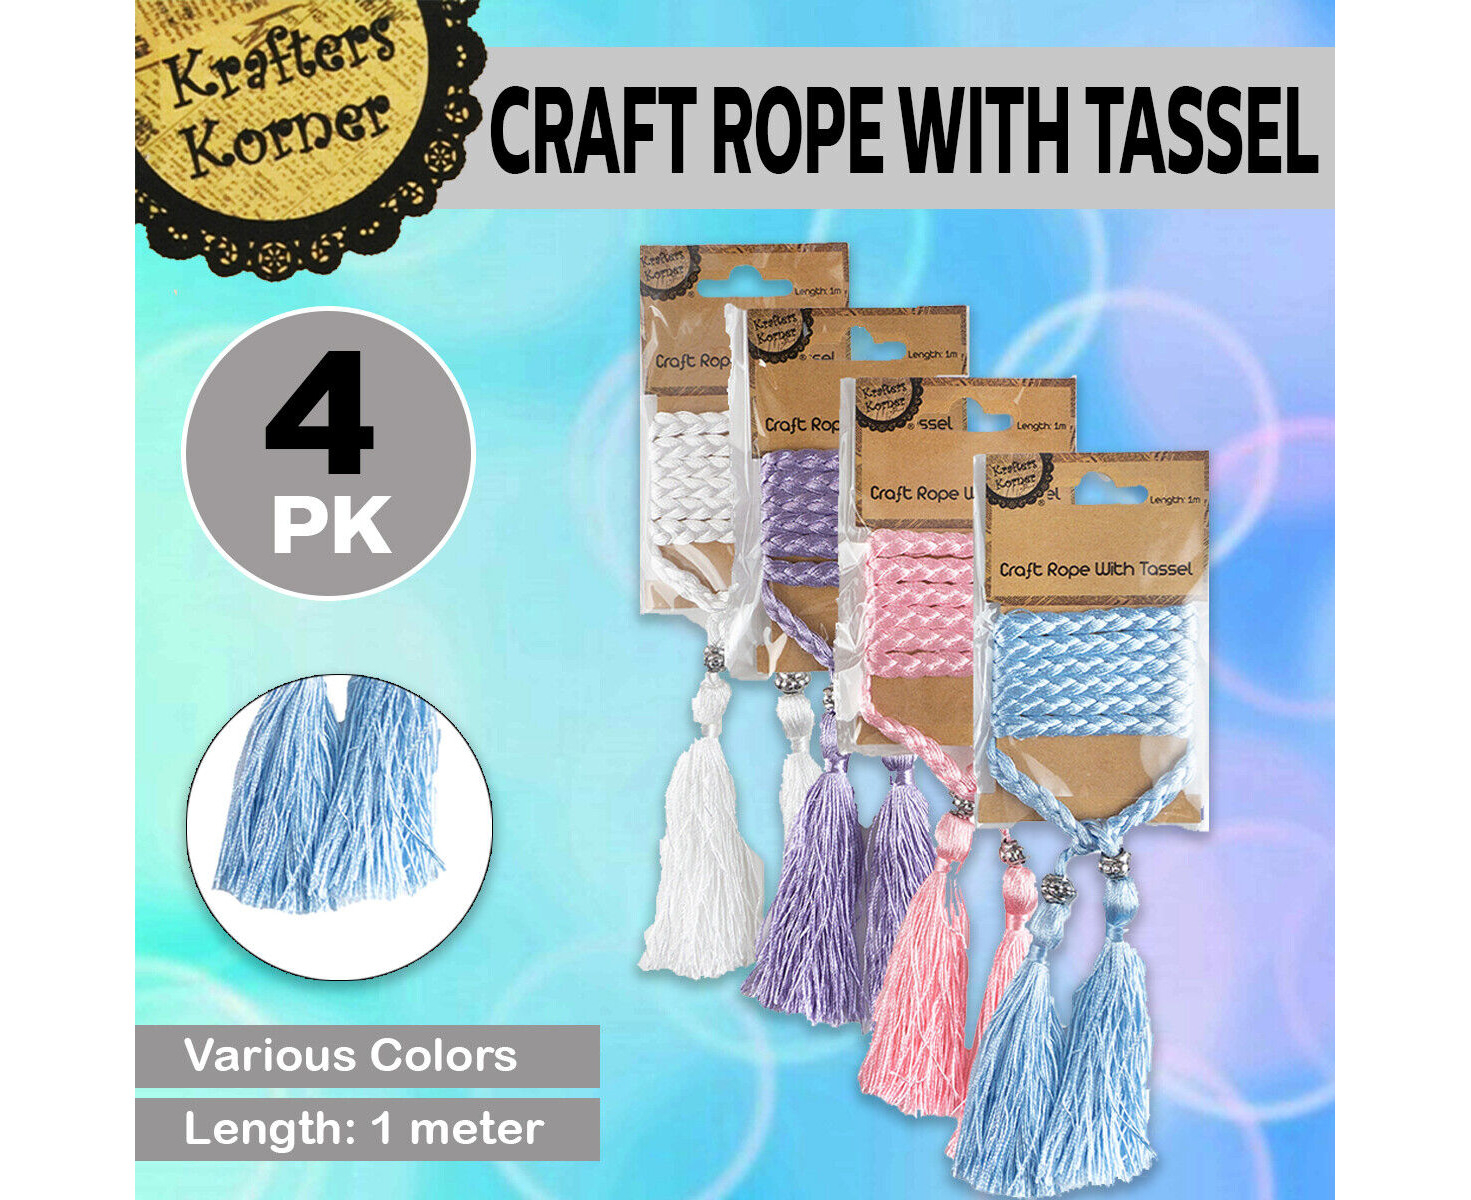 Krafters Korner [4PK] Craft Rope With Tassel, Made Of Natural Material, 1M